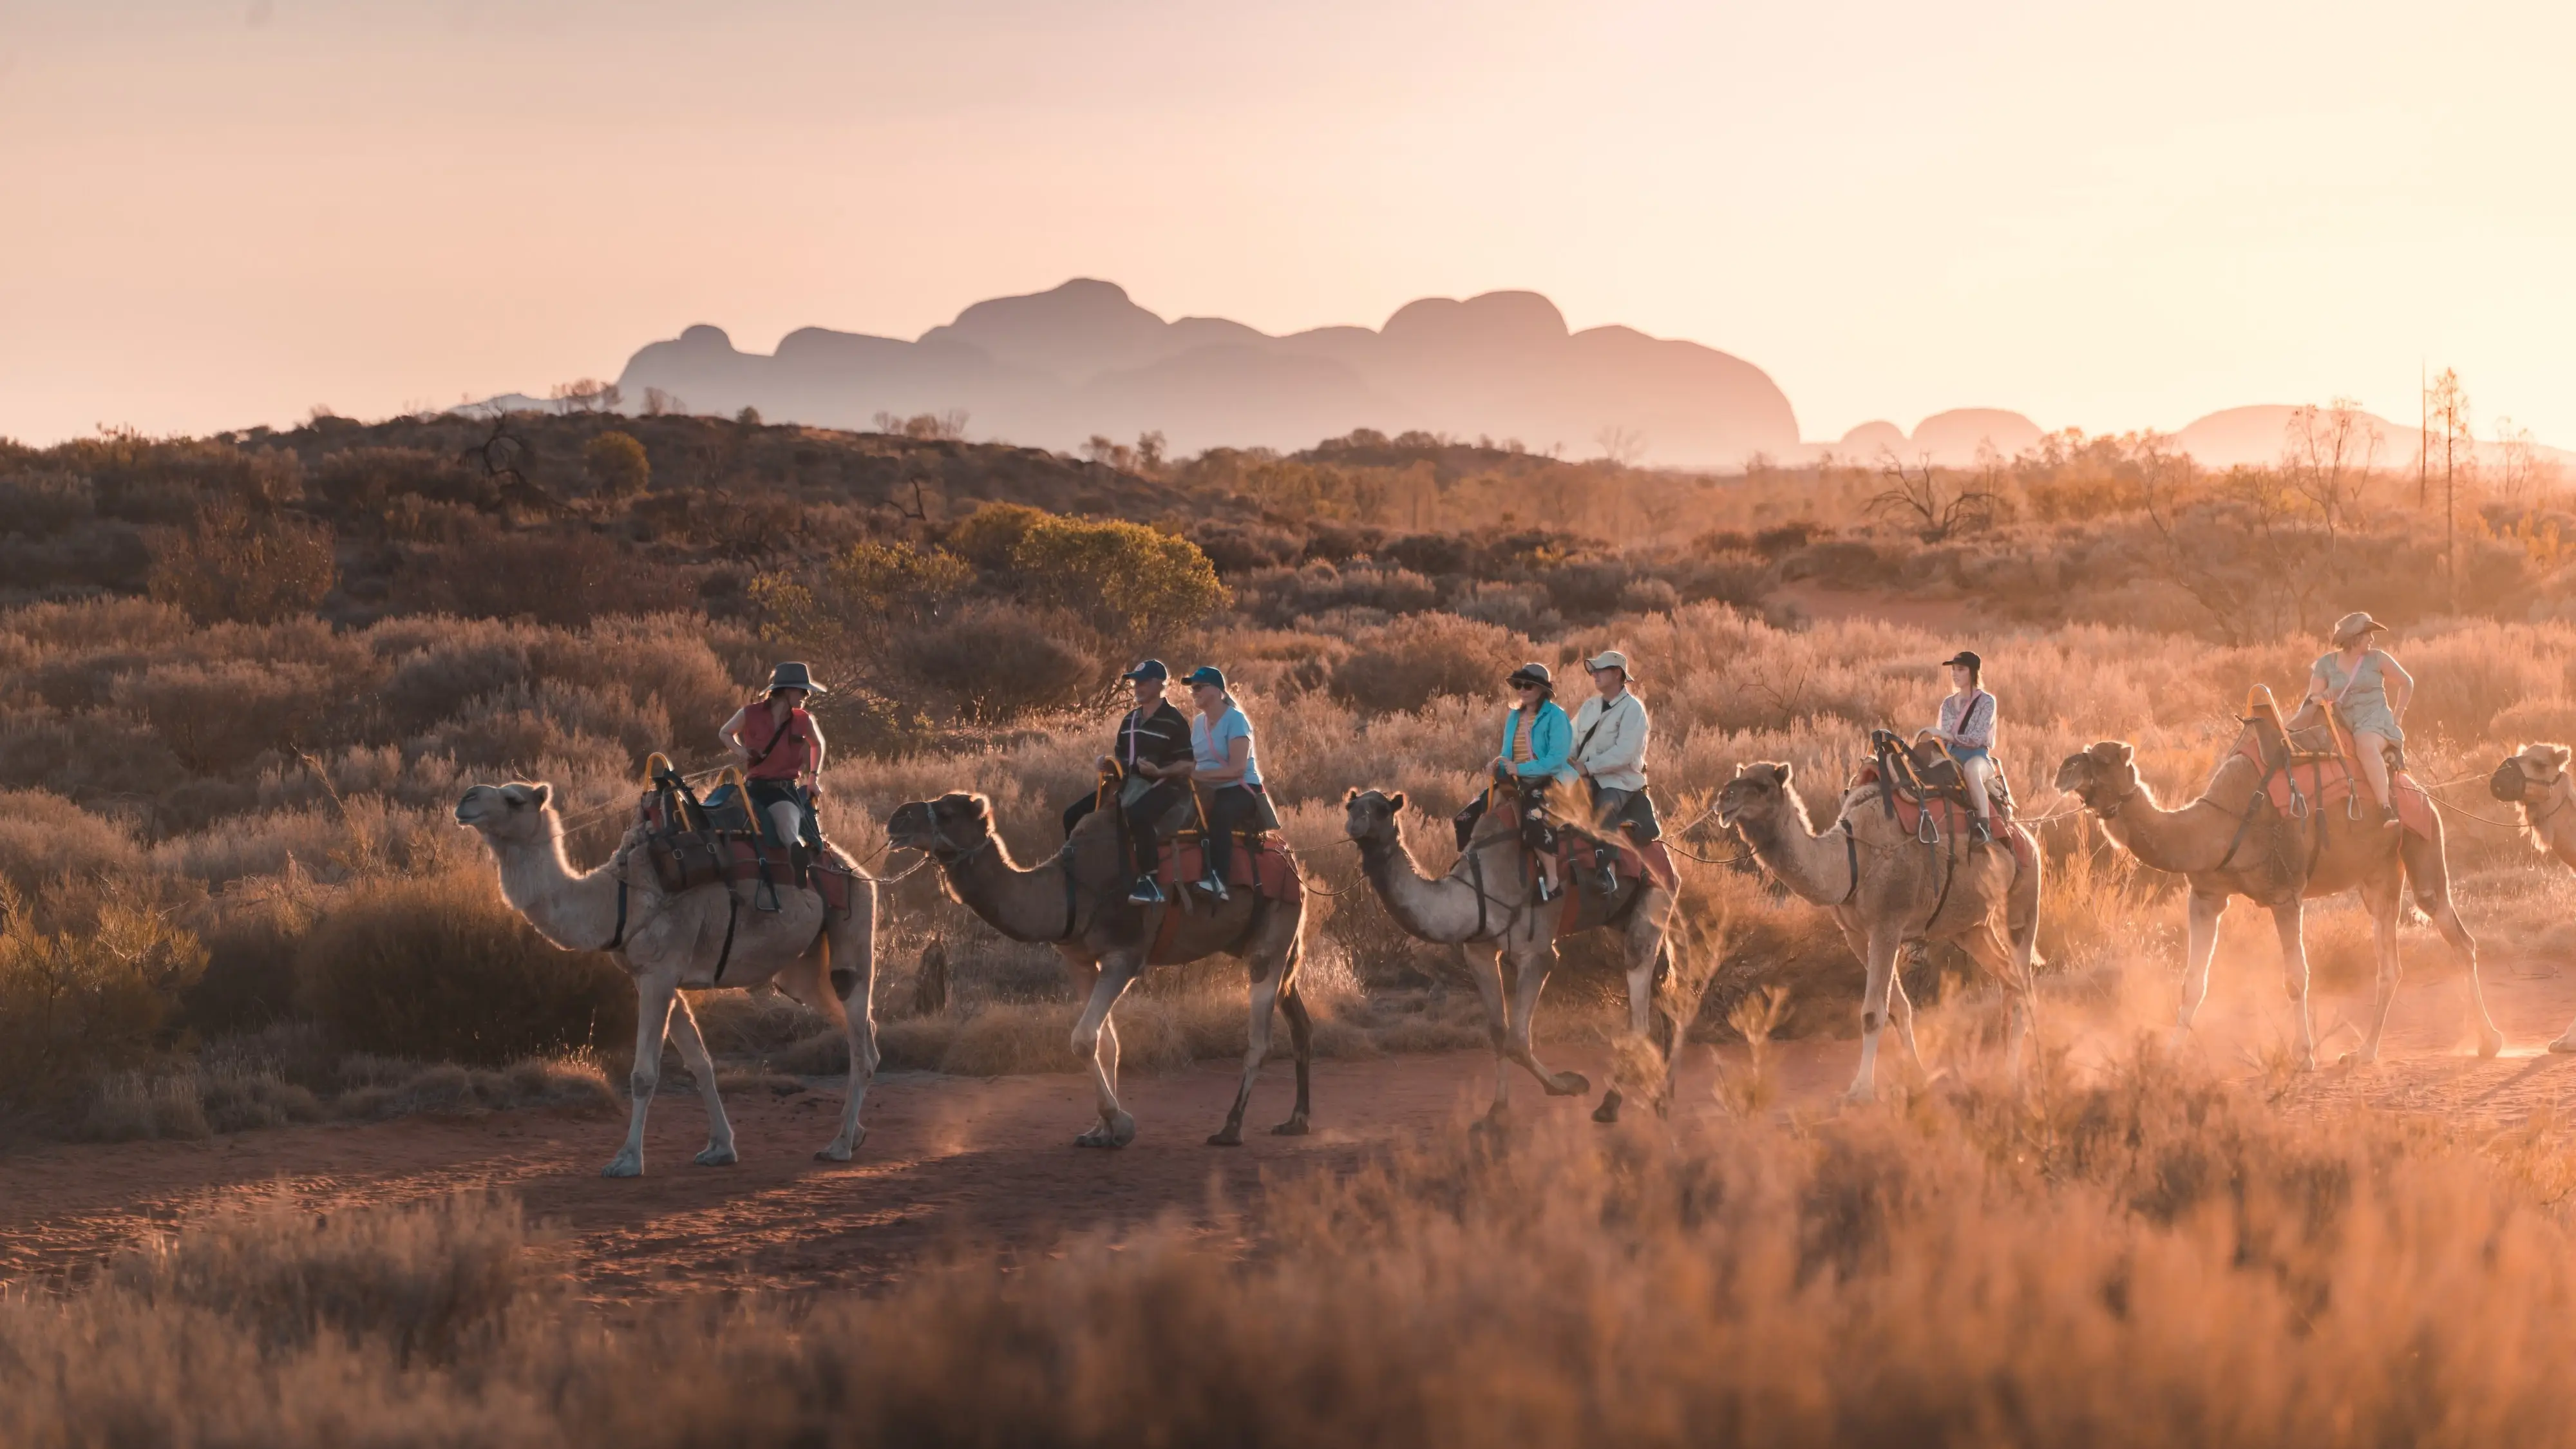 Tourists on camelback being lead through the Uluru landscape at sunrise. Image credit: Tourism NT/Nic Morley